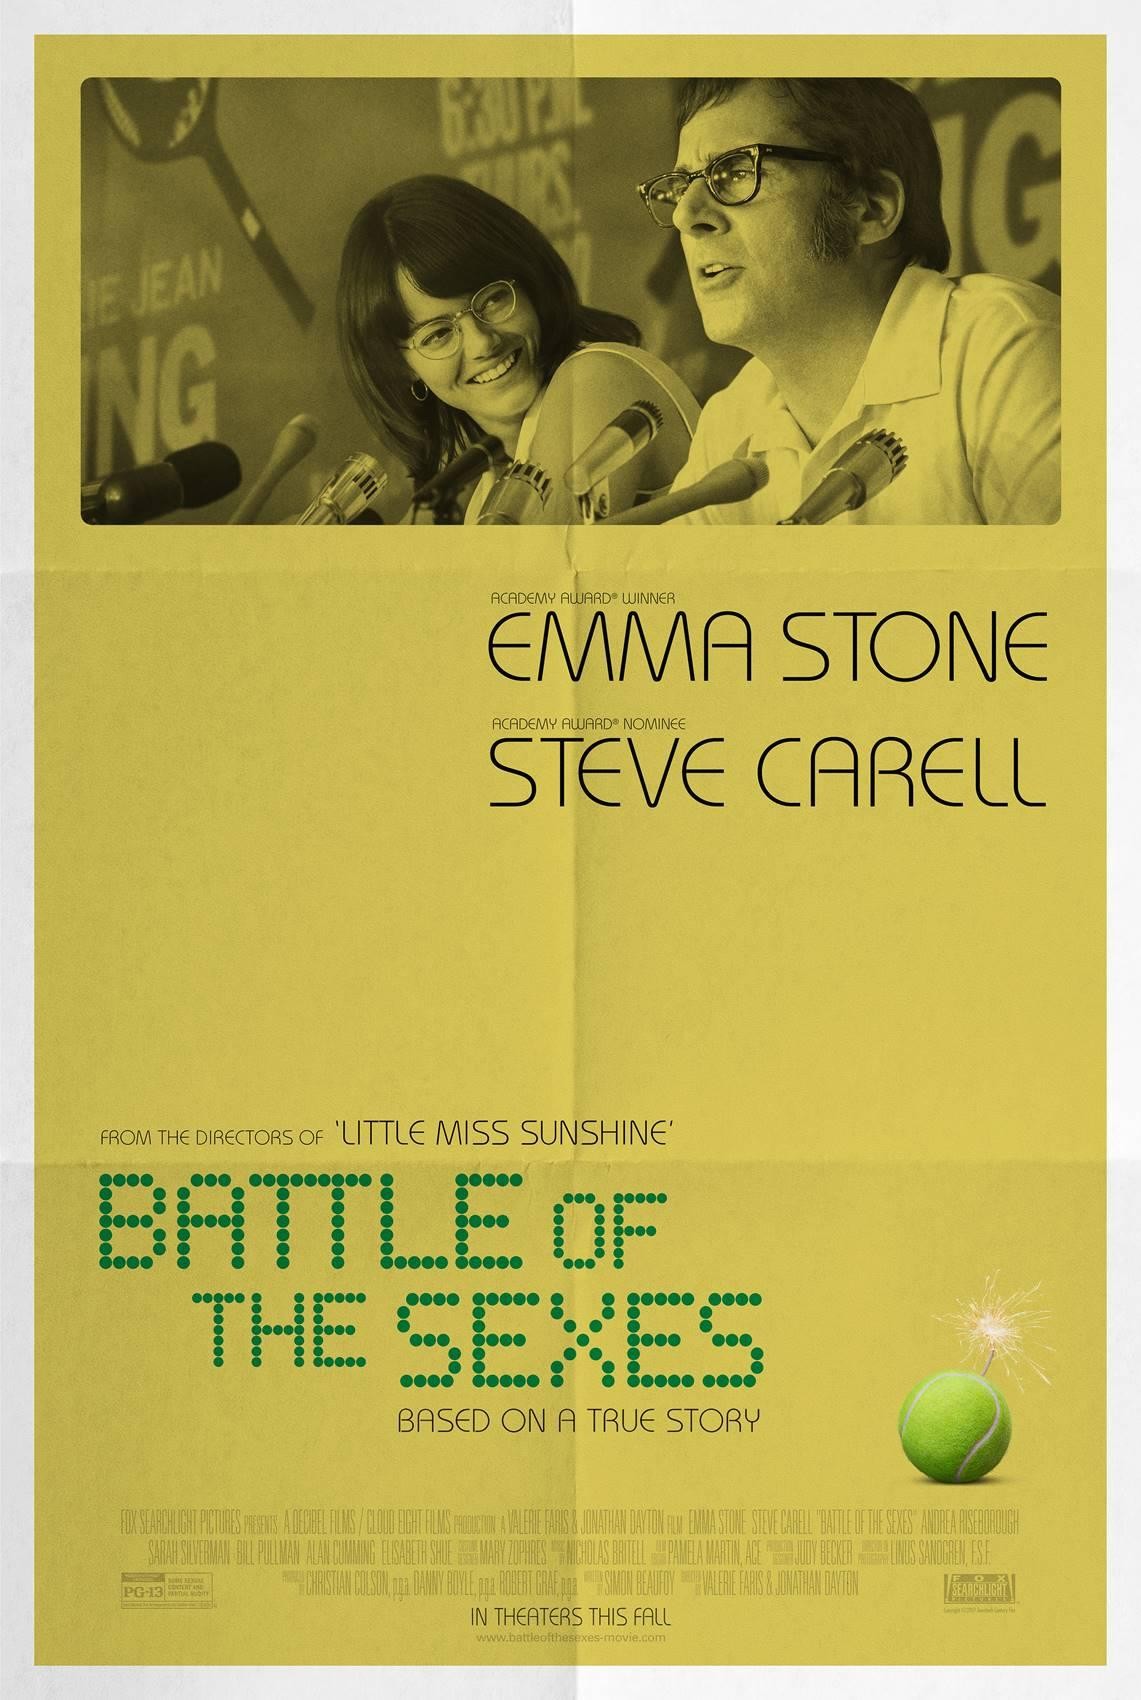 July 21, 2023 Will Be The Cinematic Battle Of The Sexes